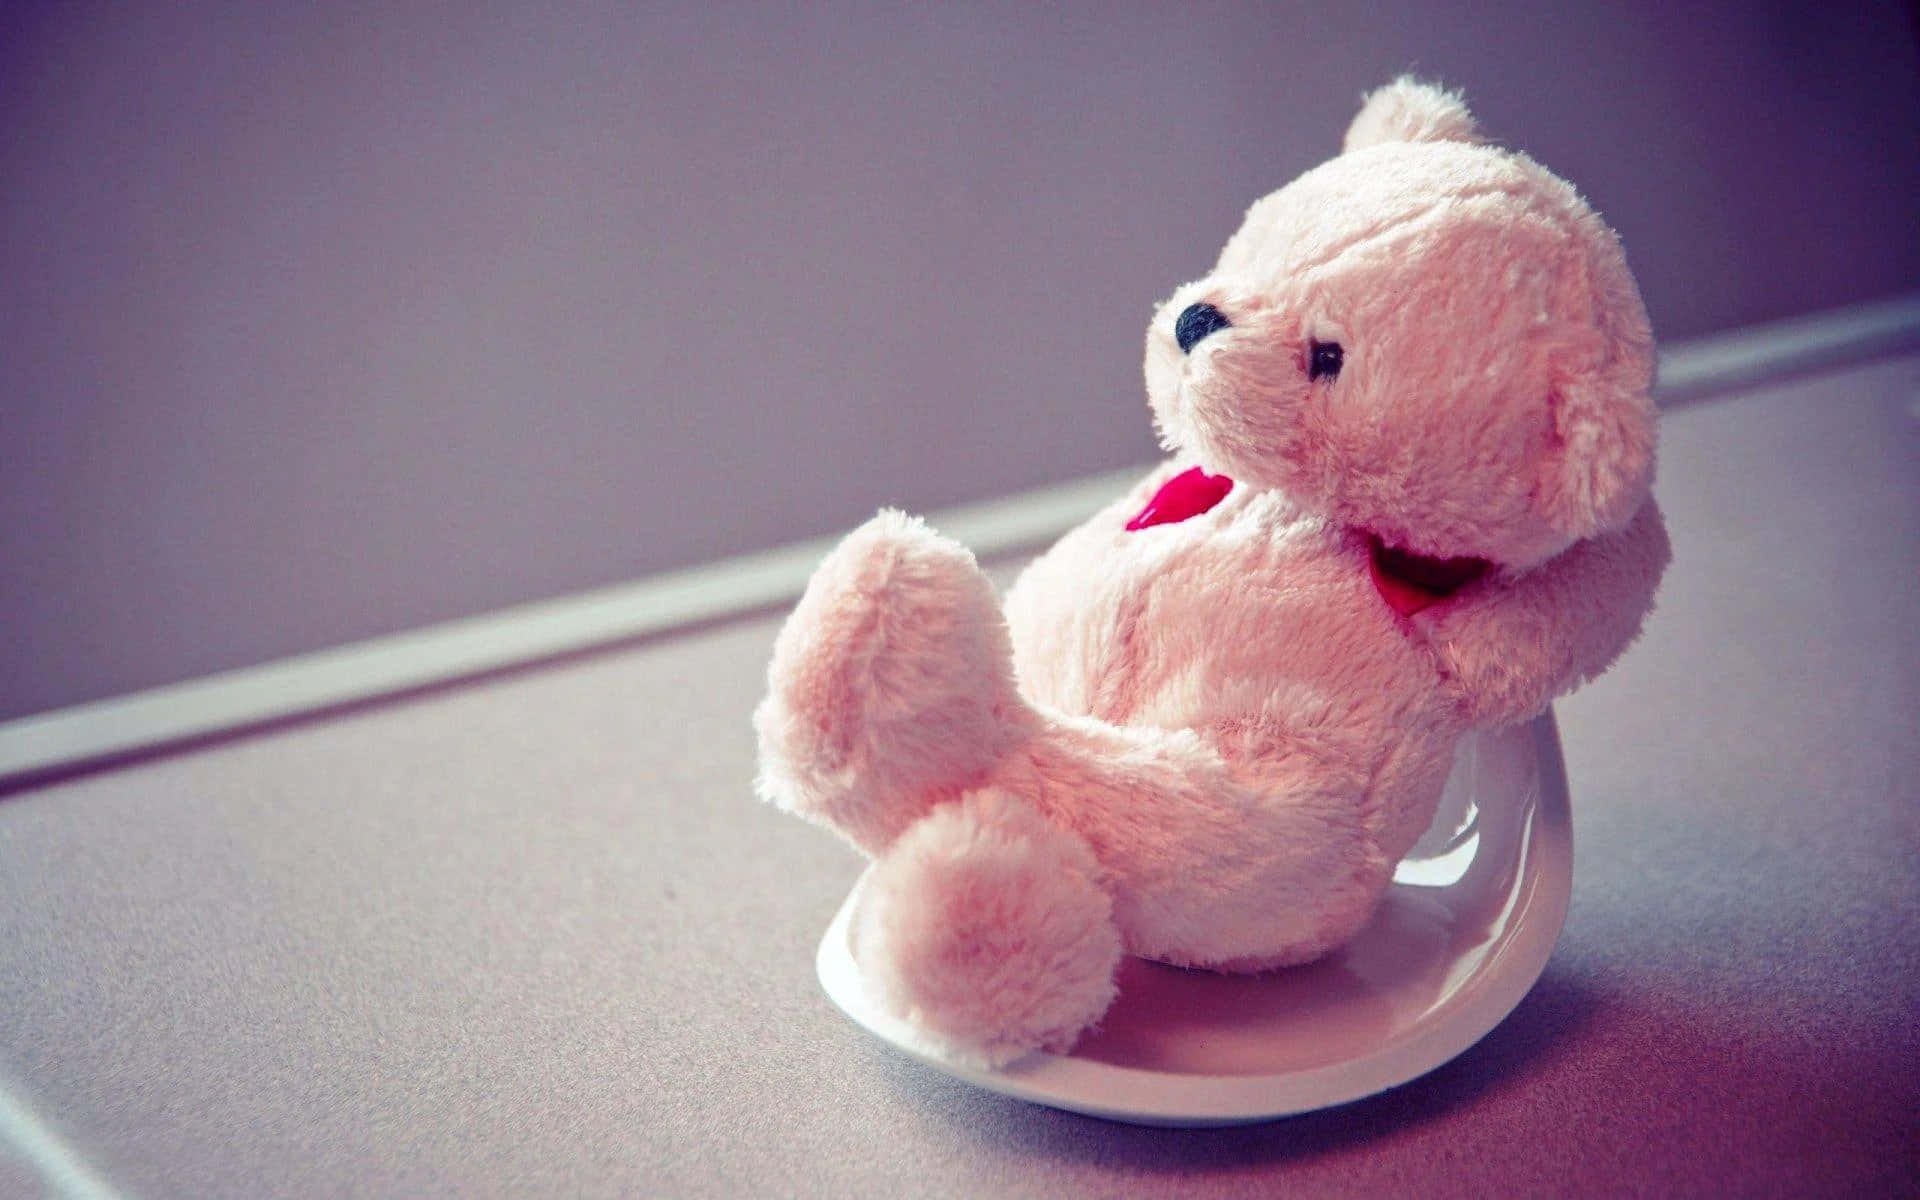 Ready to cuddle? An adorable teddy bear is sure to spread some joy.